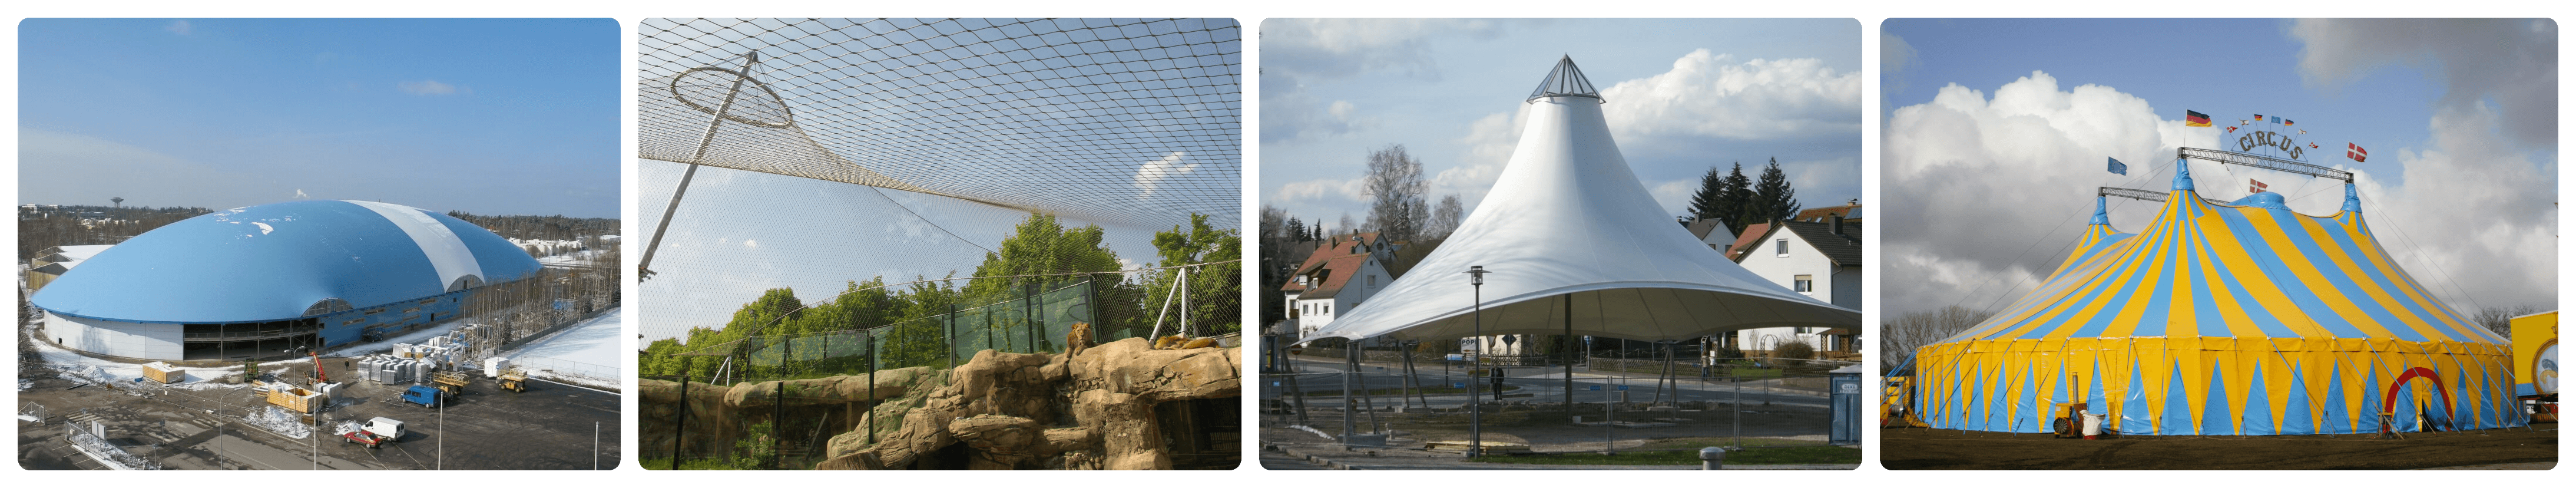 Air hall, animal cage, high point roofing and circus tent